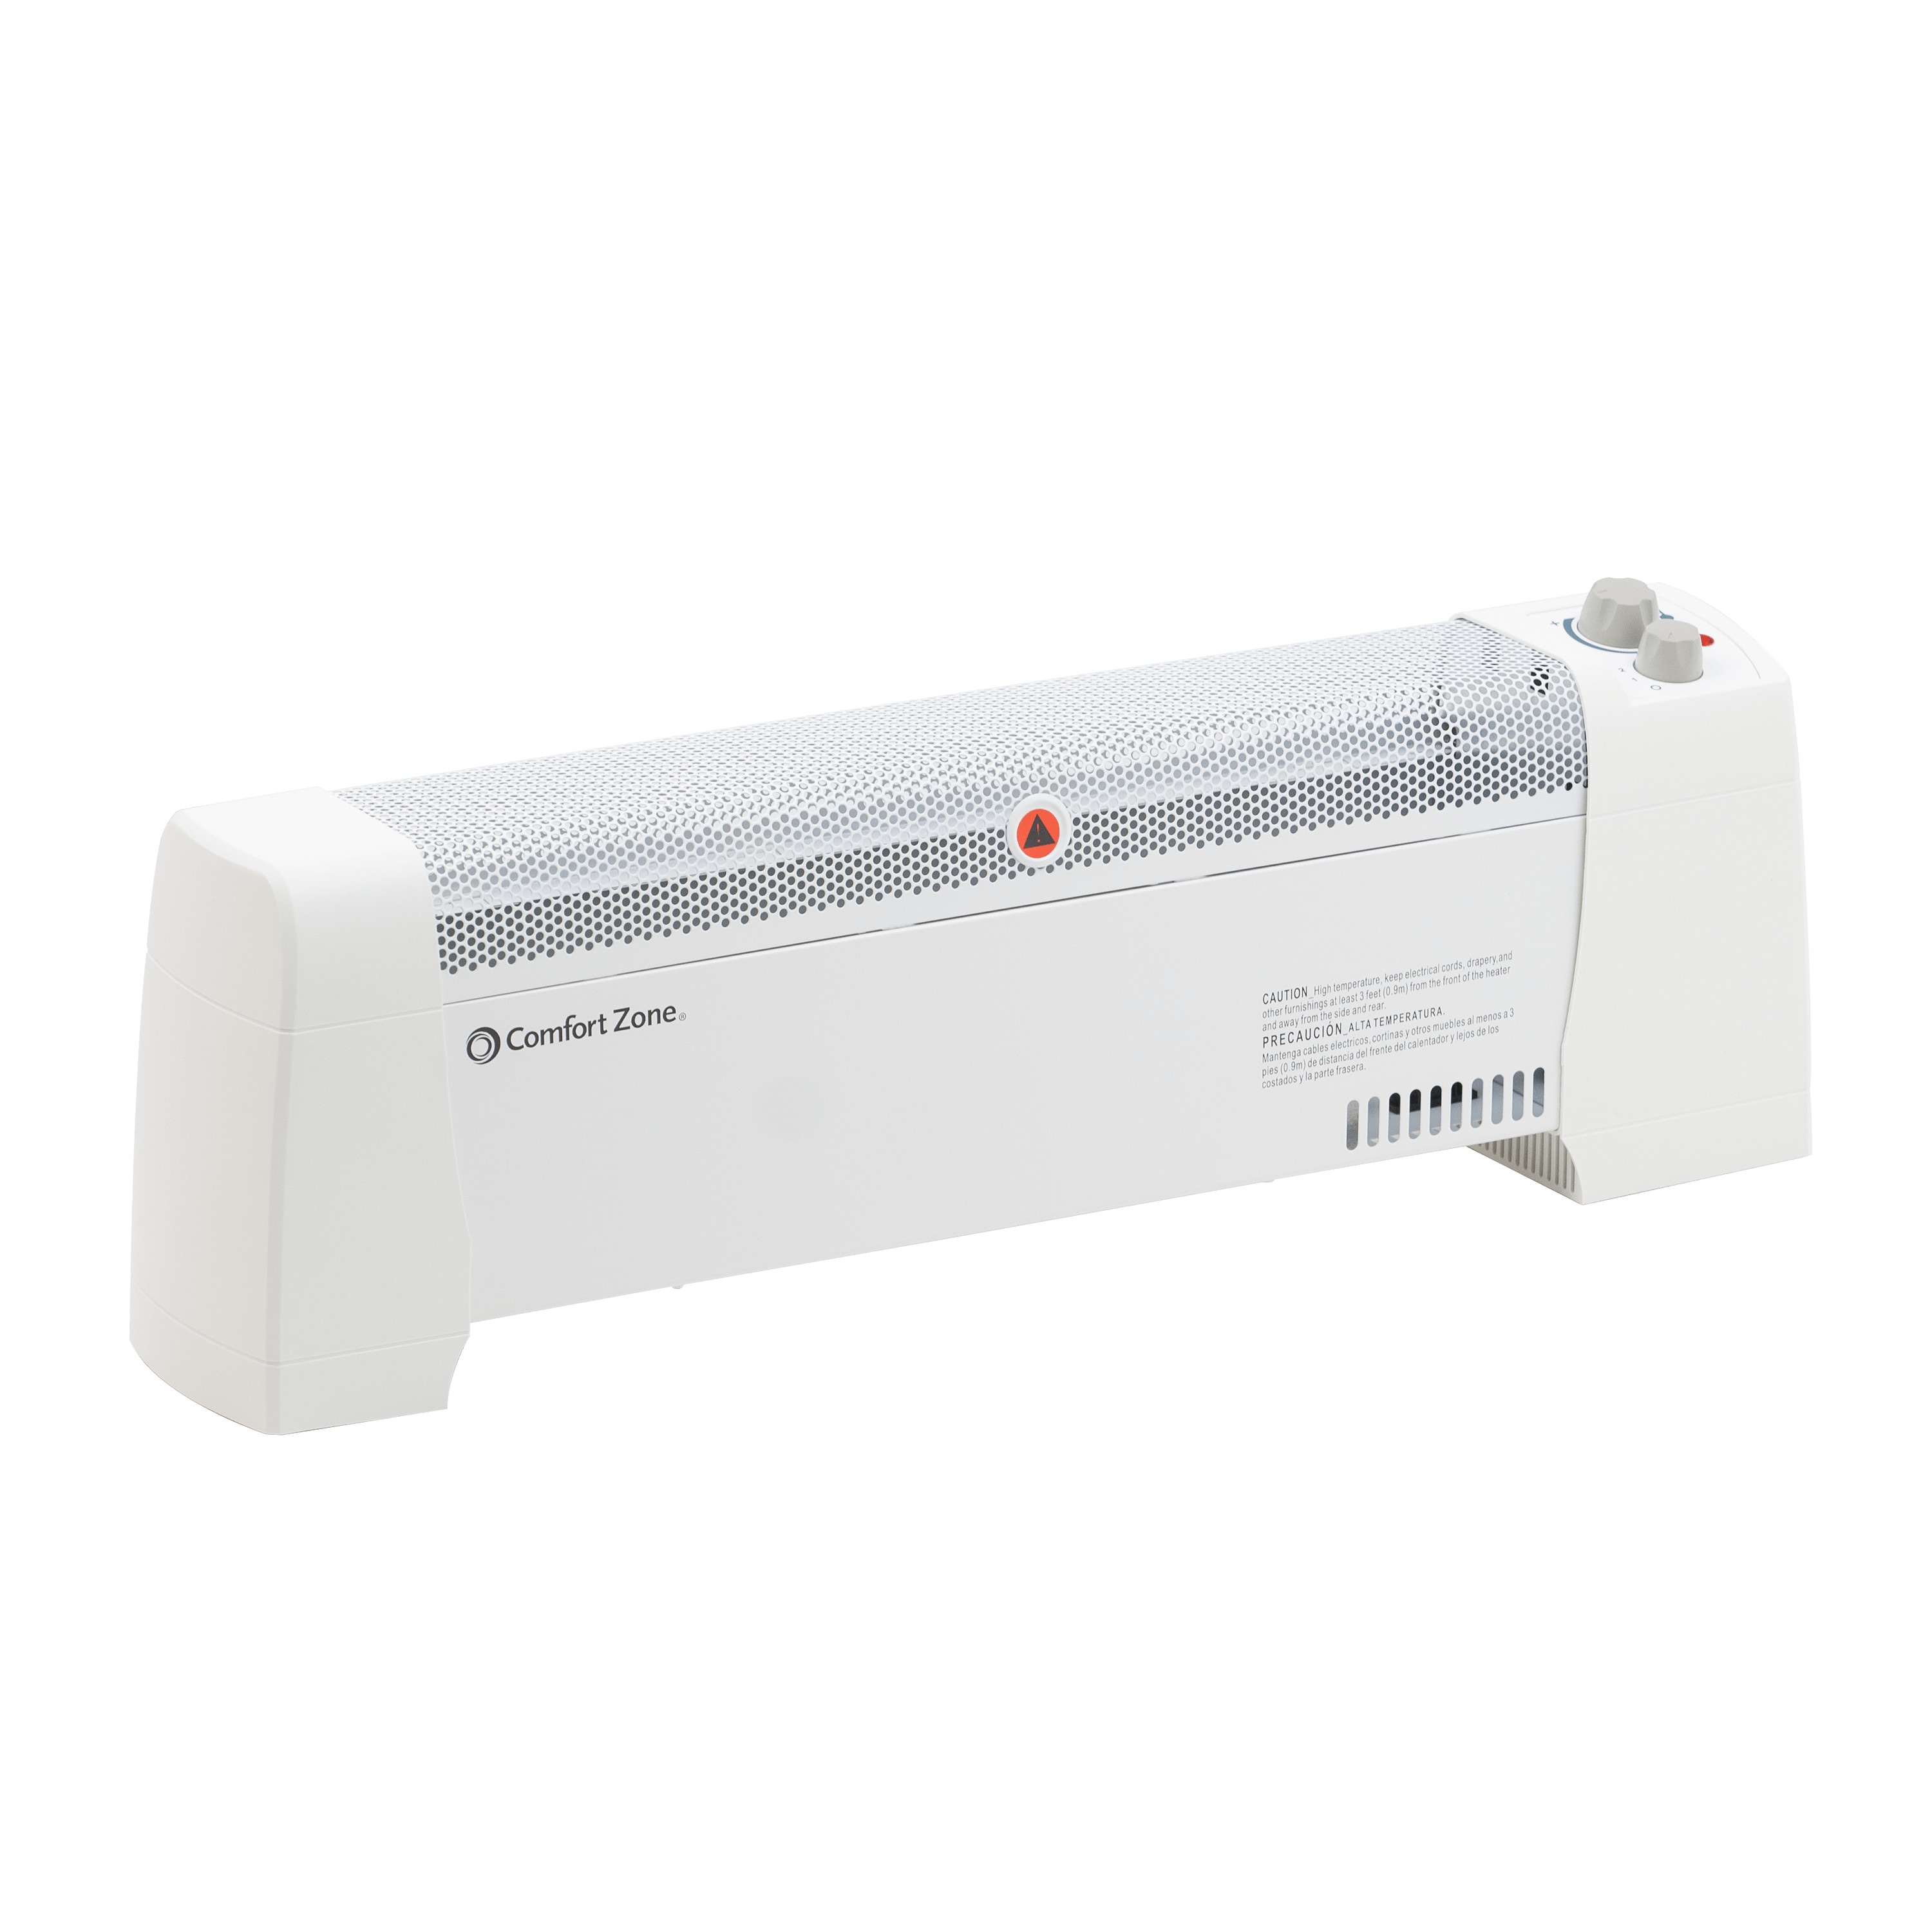 Convection  Baseboard Heater Comfort Zone  150 sq ft